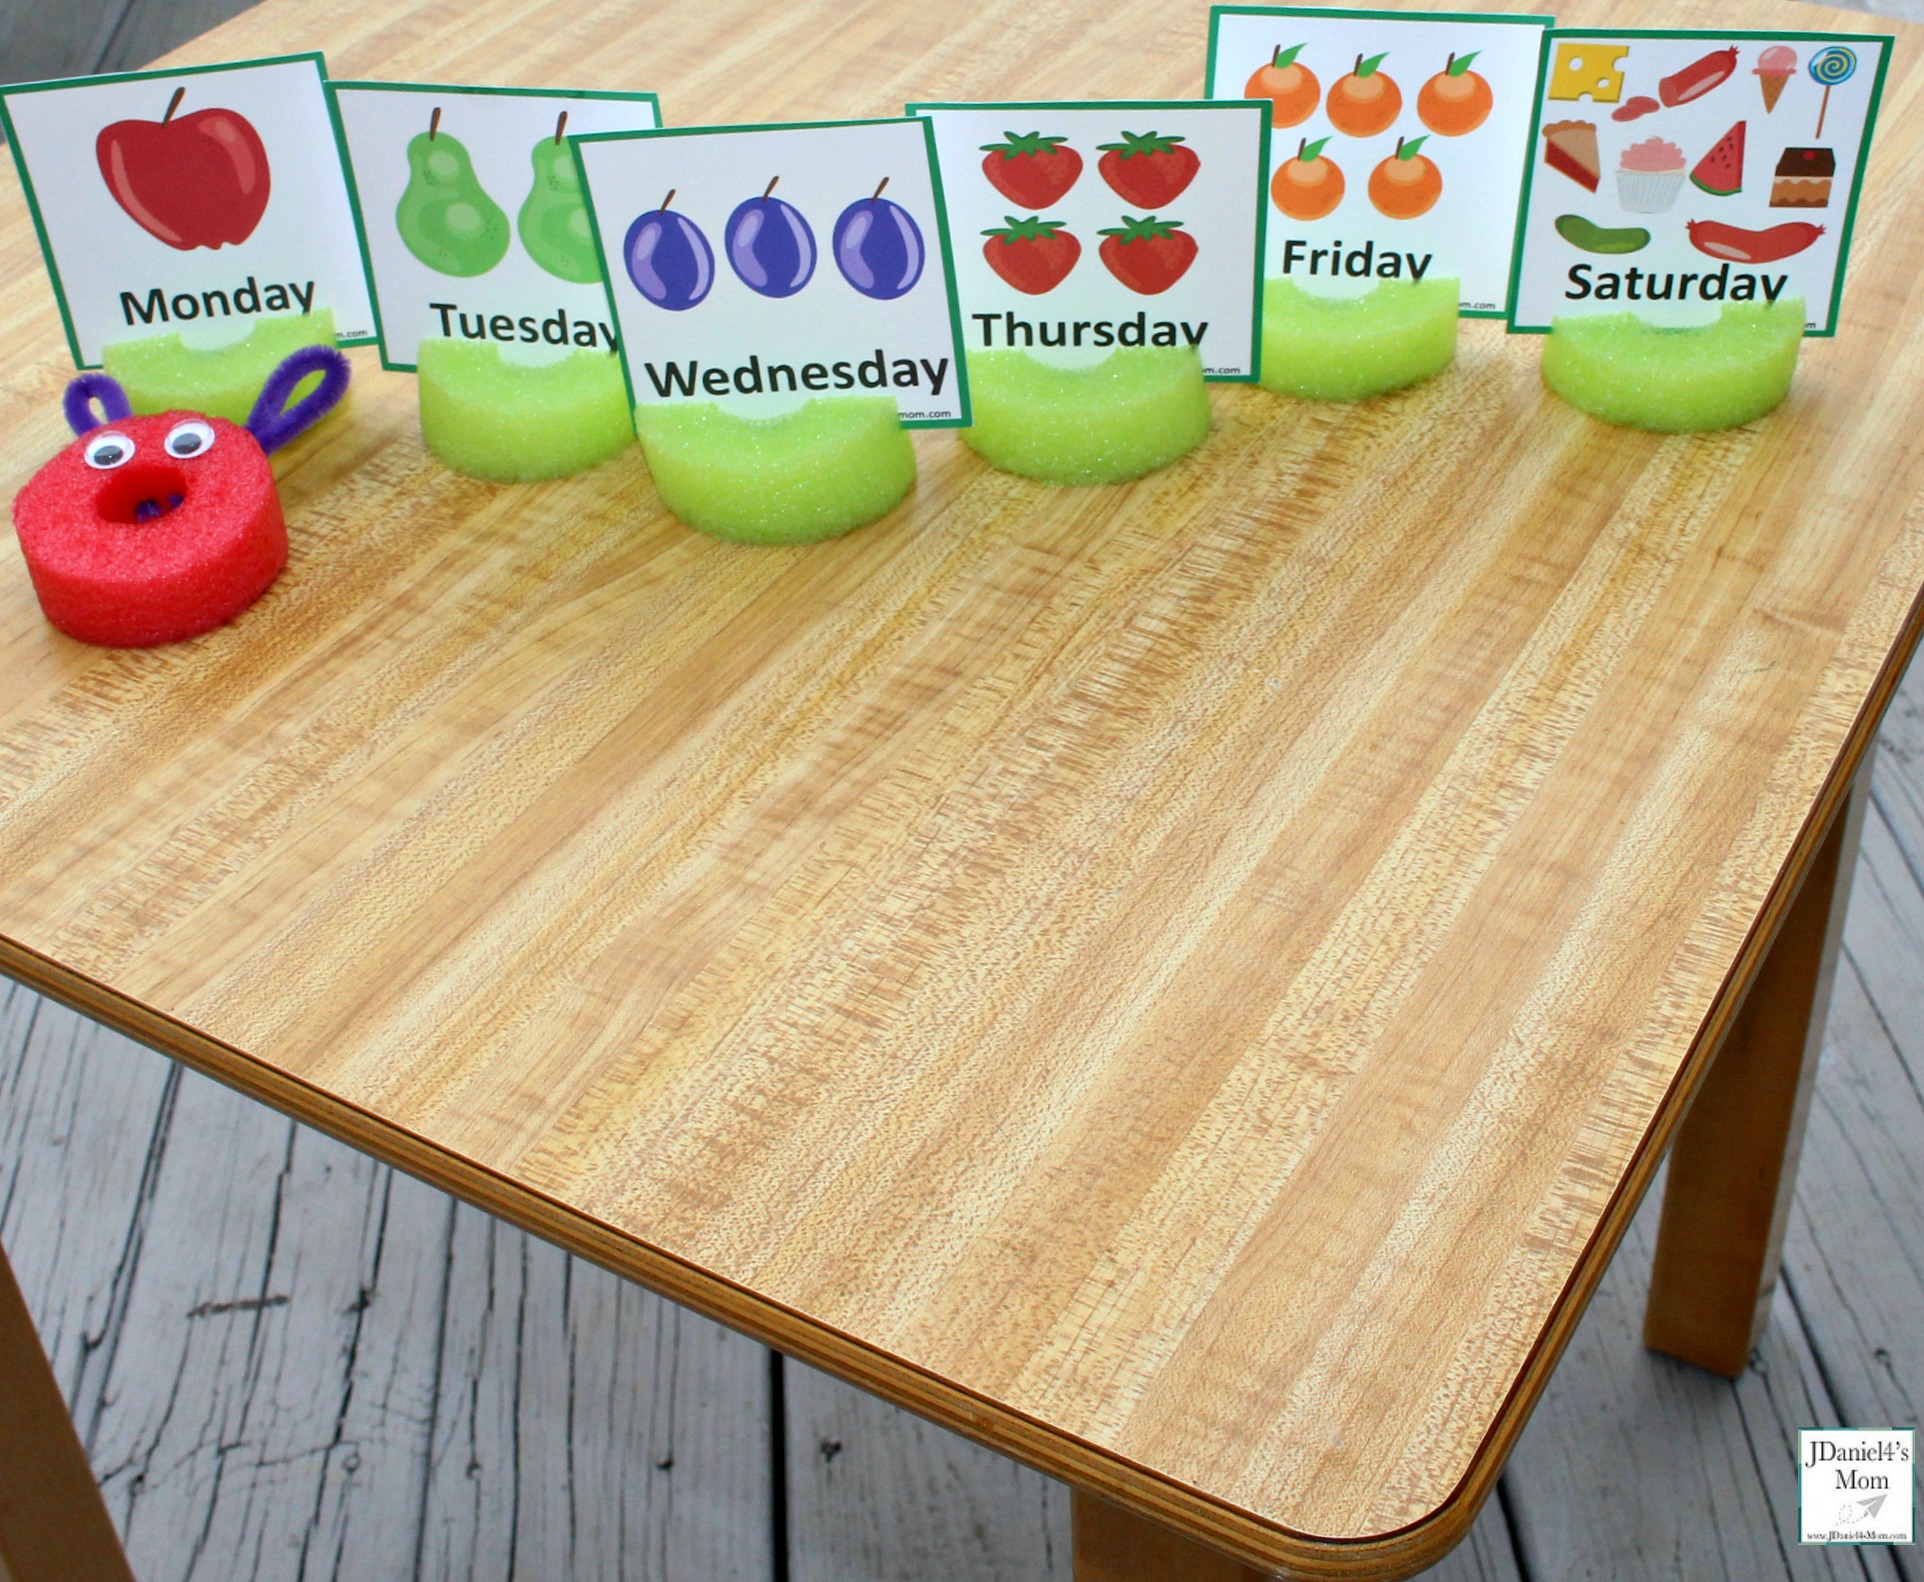 The Very Hungry Caterpillar Number Sequencing Activities with Printables - Exploring the days of the week.